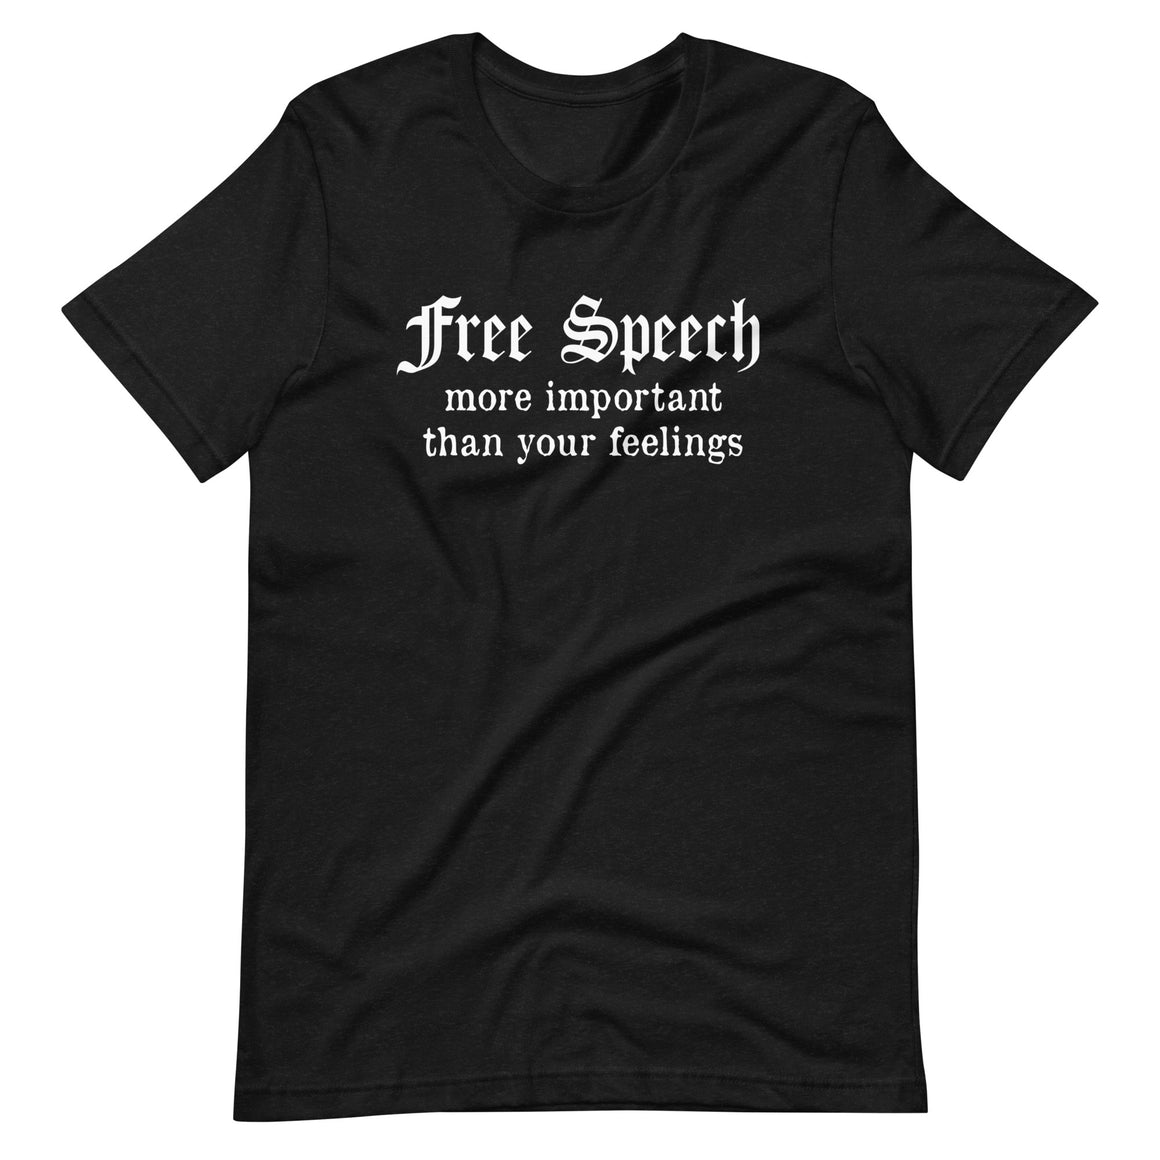 Free Speech More Important Than Your Feelings Shirt by Libertarian Country